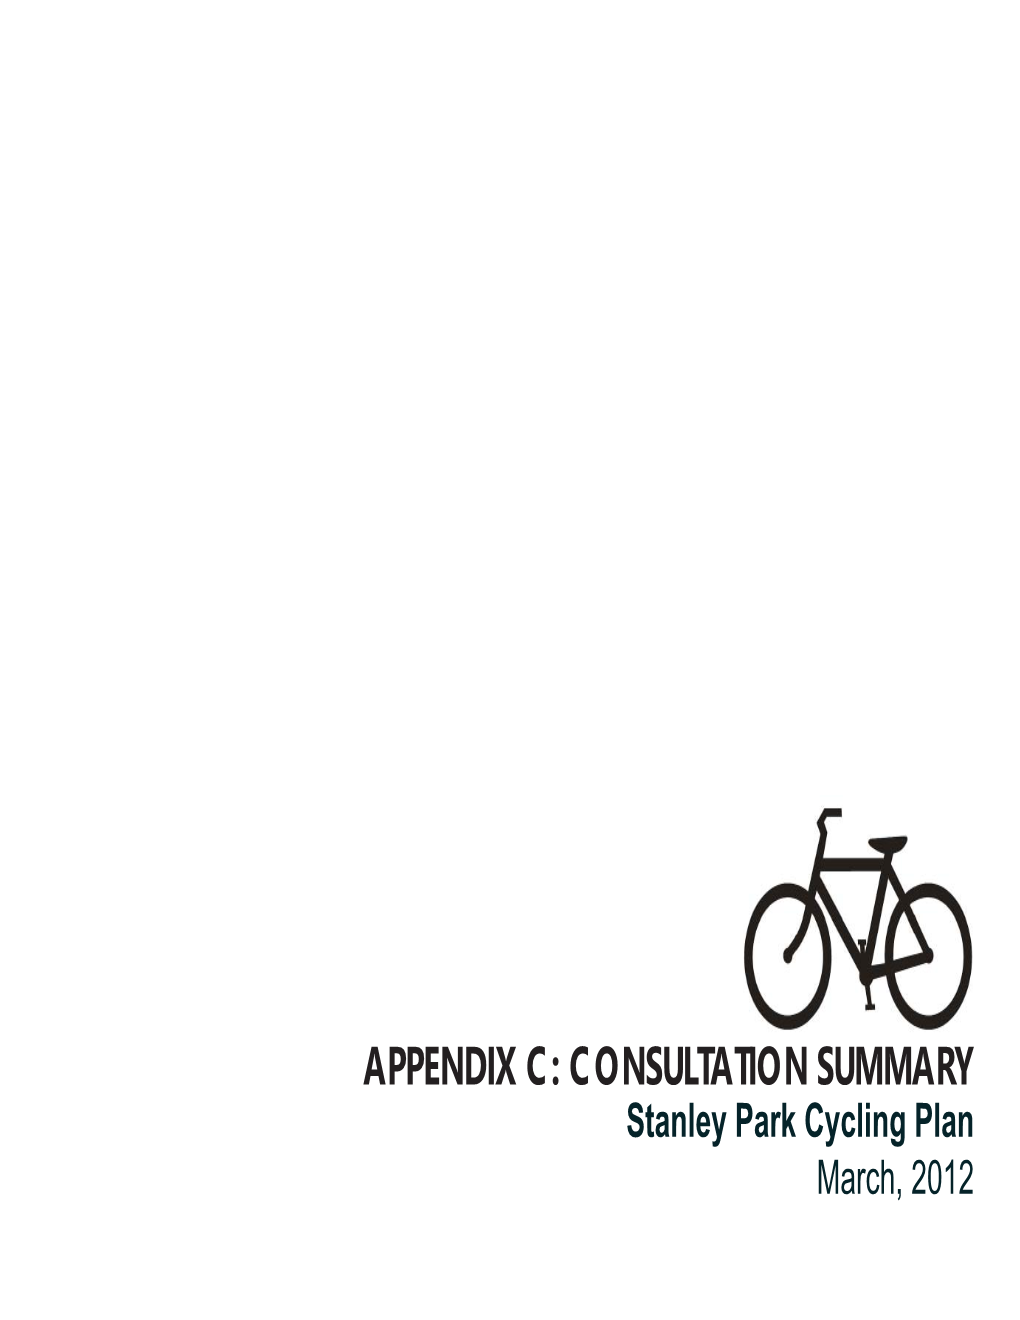 Stanley Park Cycling Plan Consultation Summary March 2012